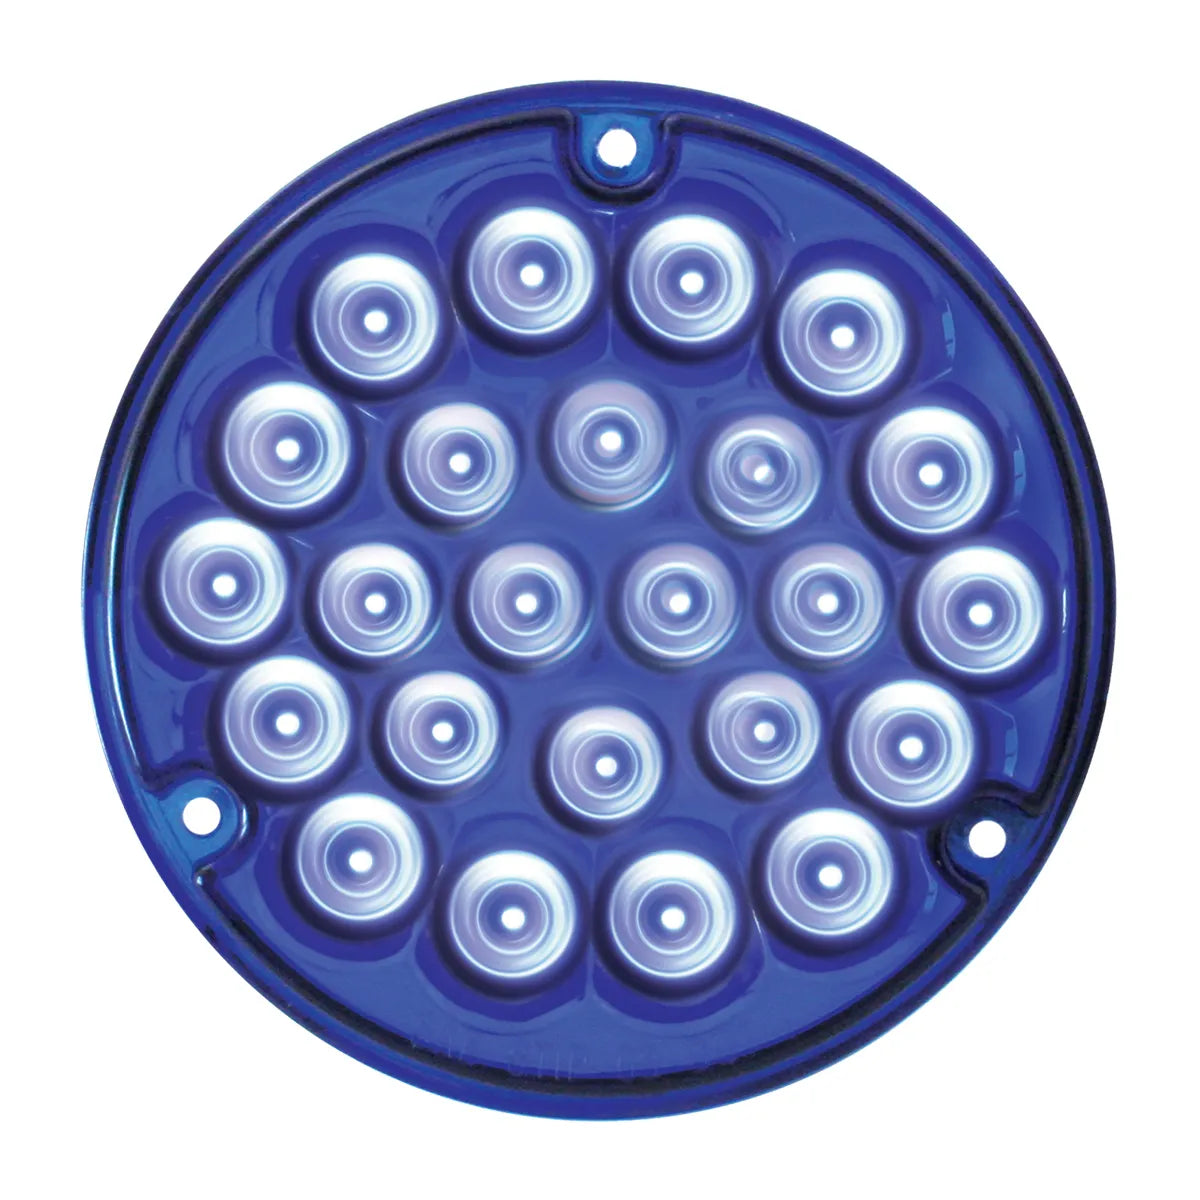 Interior Pearl 24 LED Light in Blue